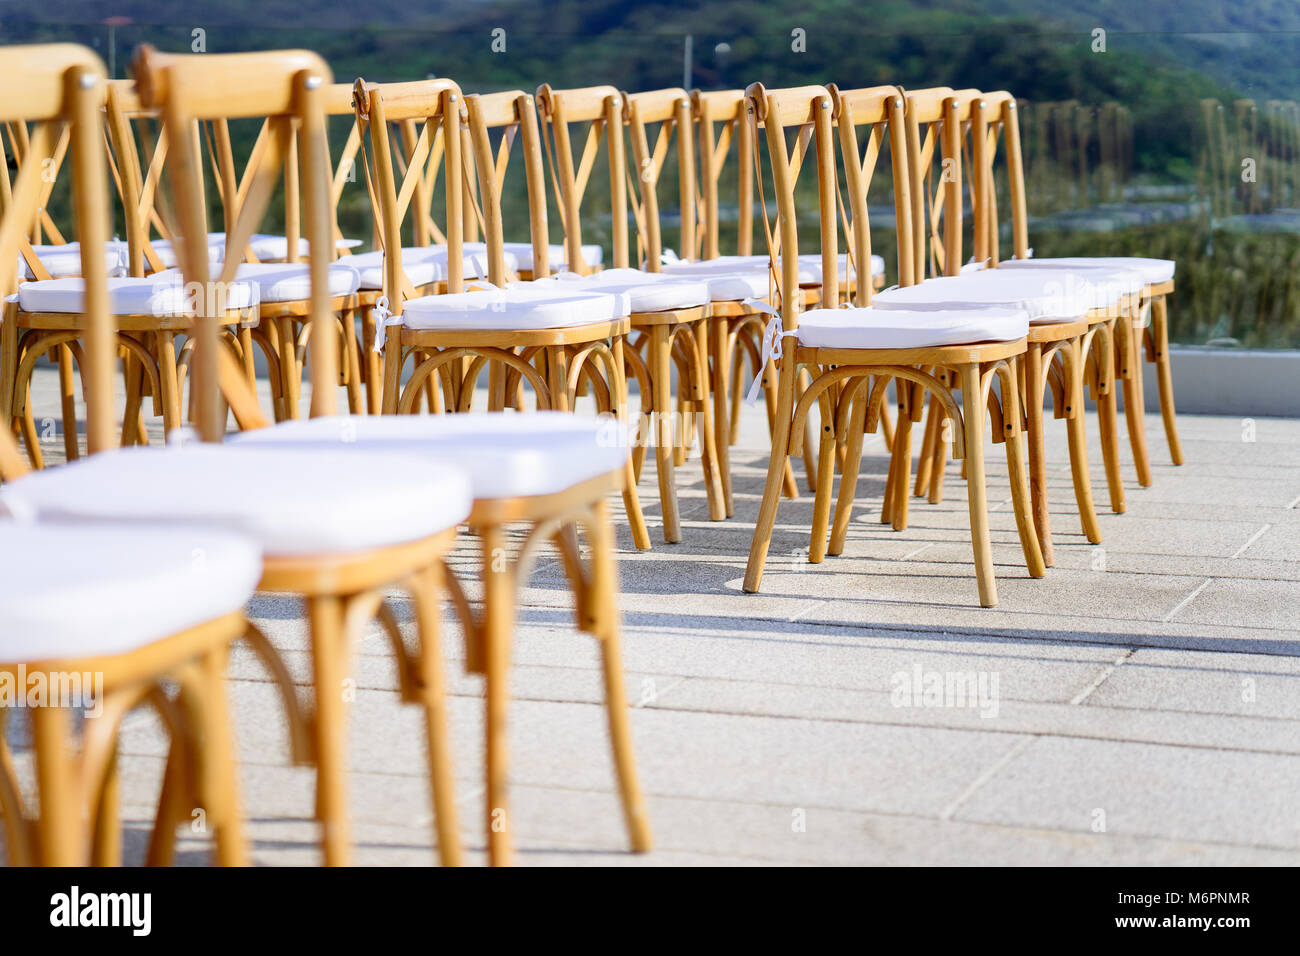 Folding lawn chairs line up for wedding venue Stock Photo